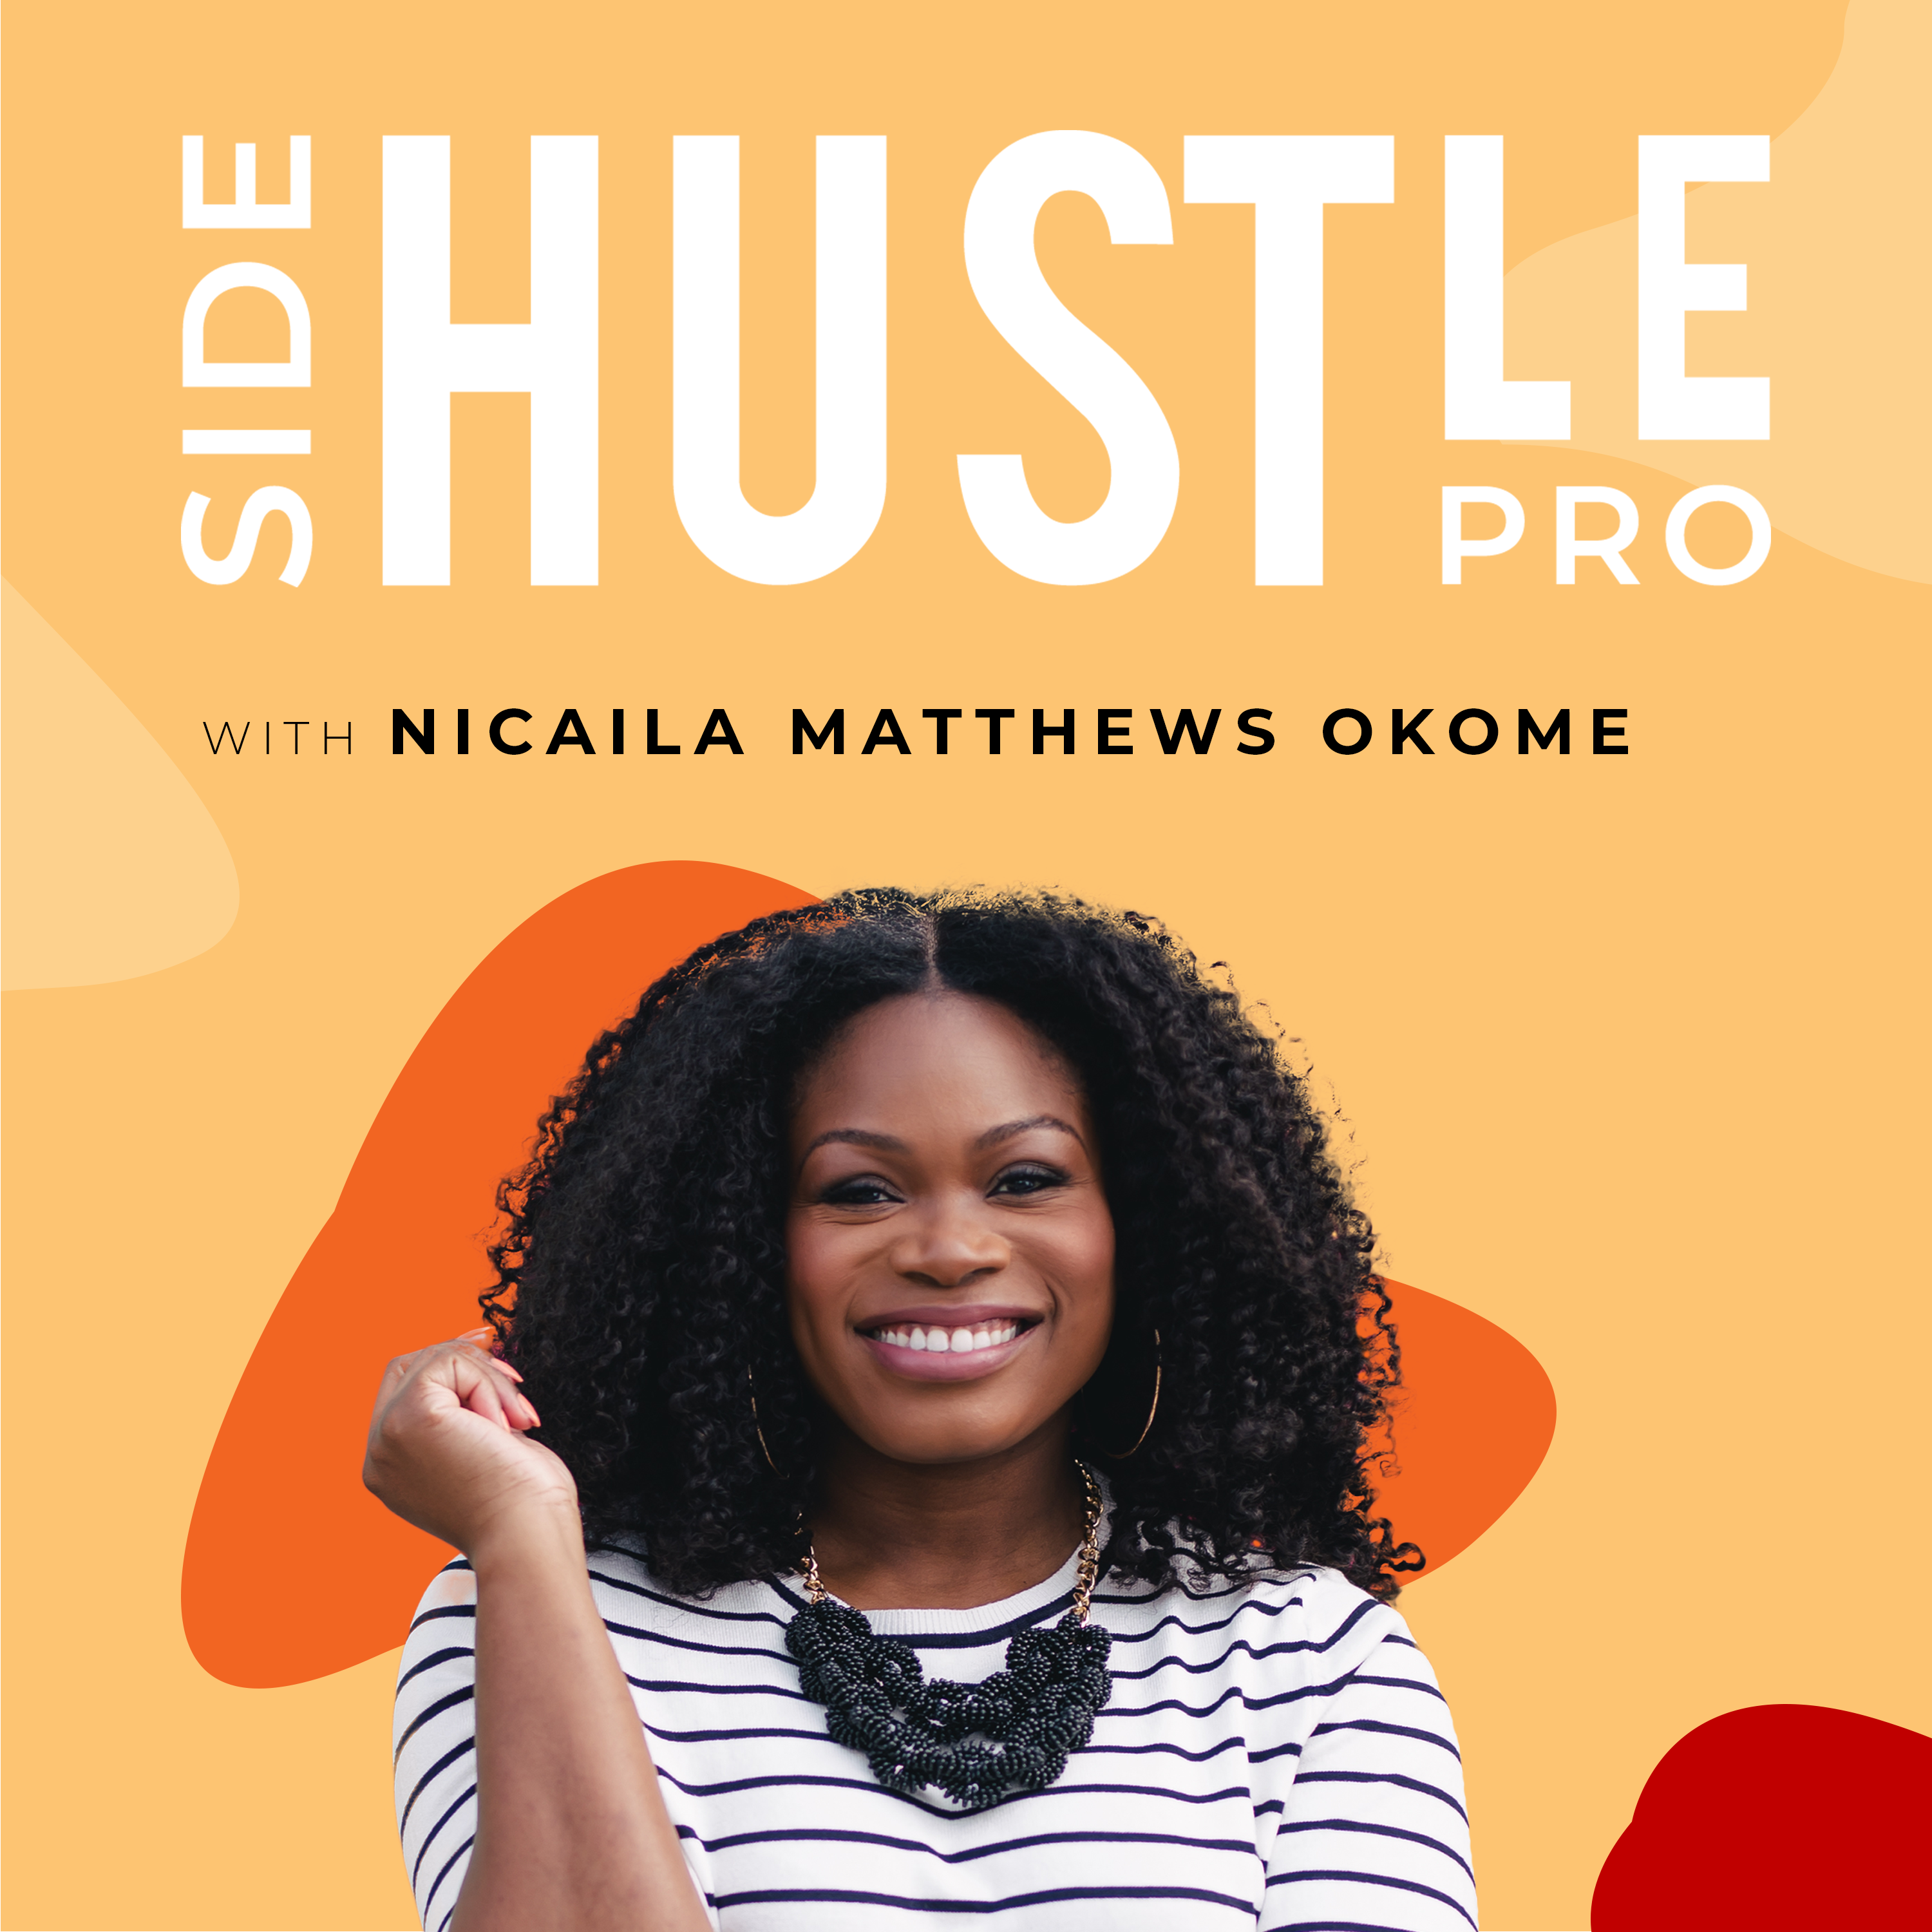 235: No More Excuses, It’s Time to Act on Your Side Hustle Idea